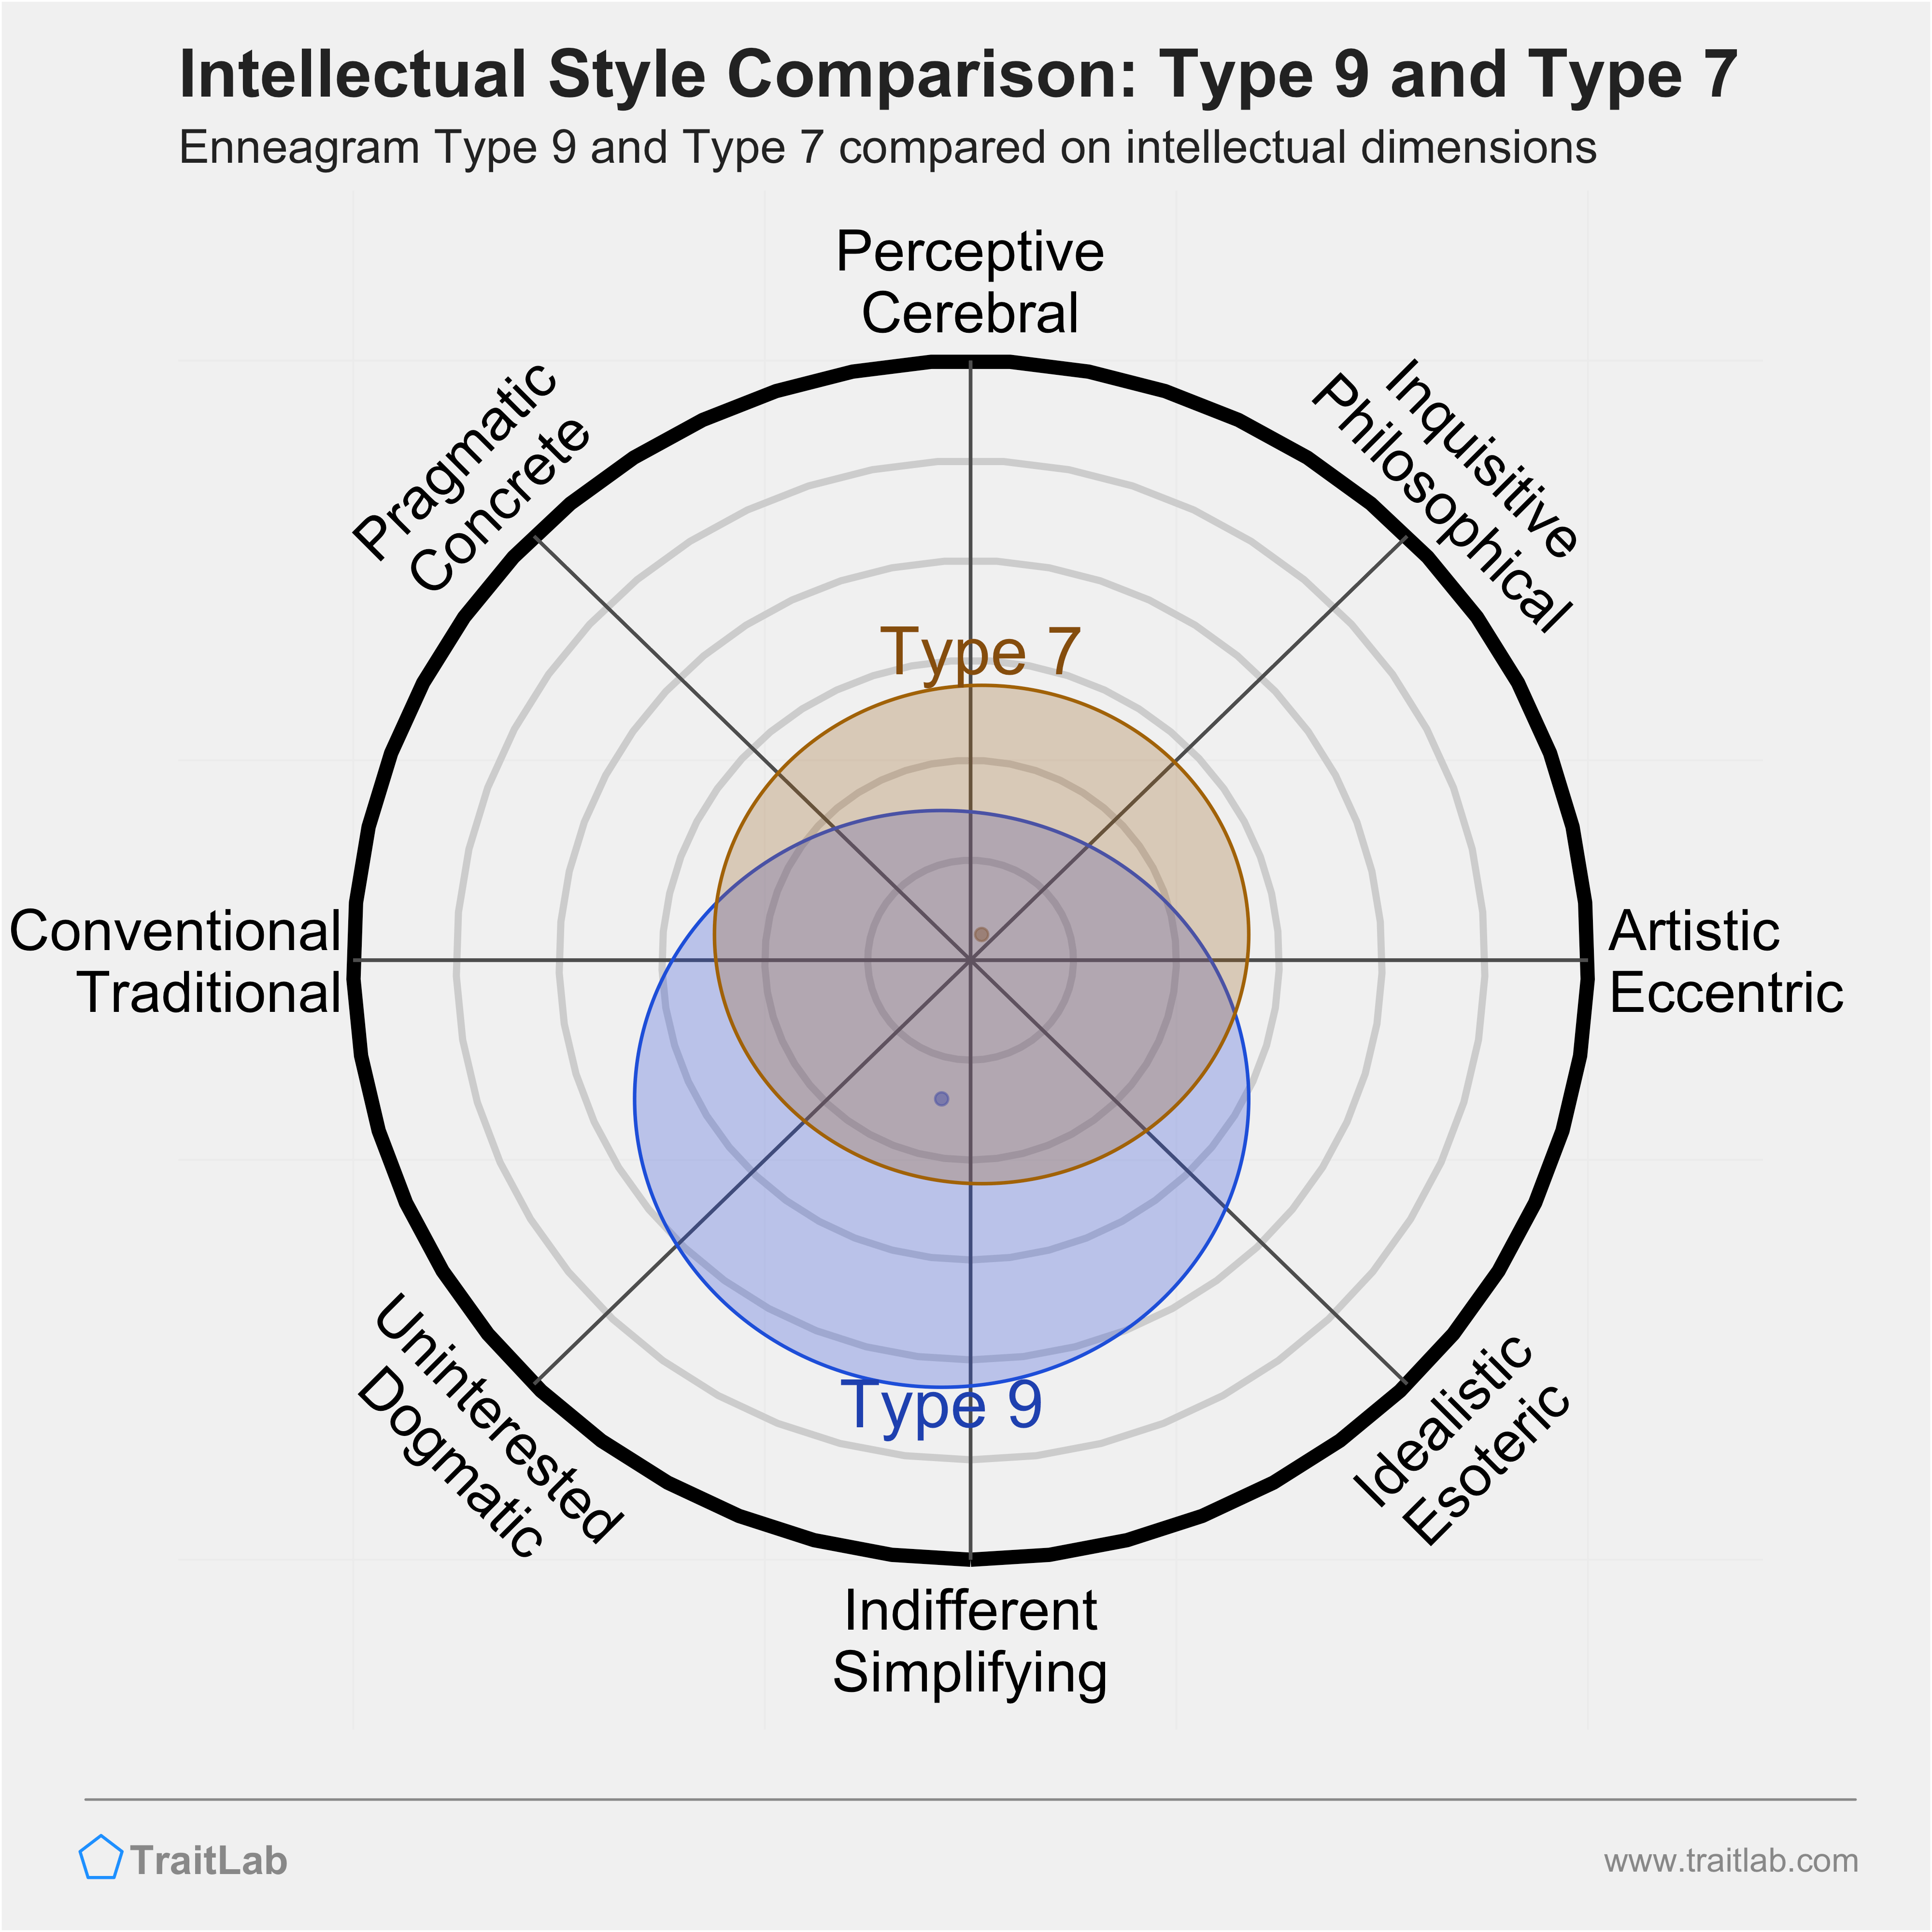 Type 9 and Type 7 comparison across intellectual dimensions